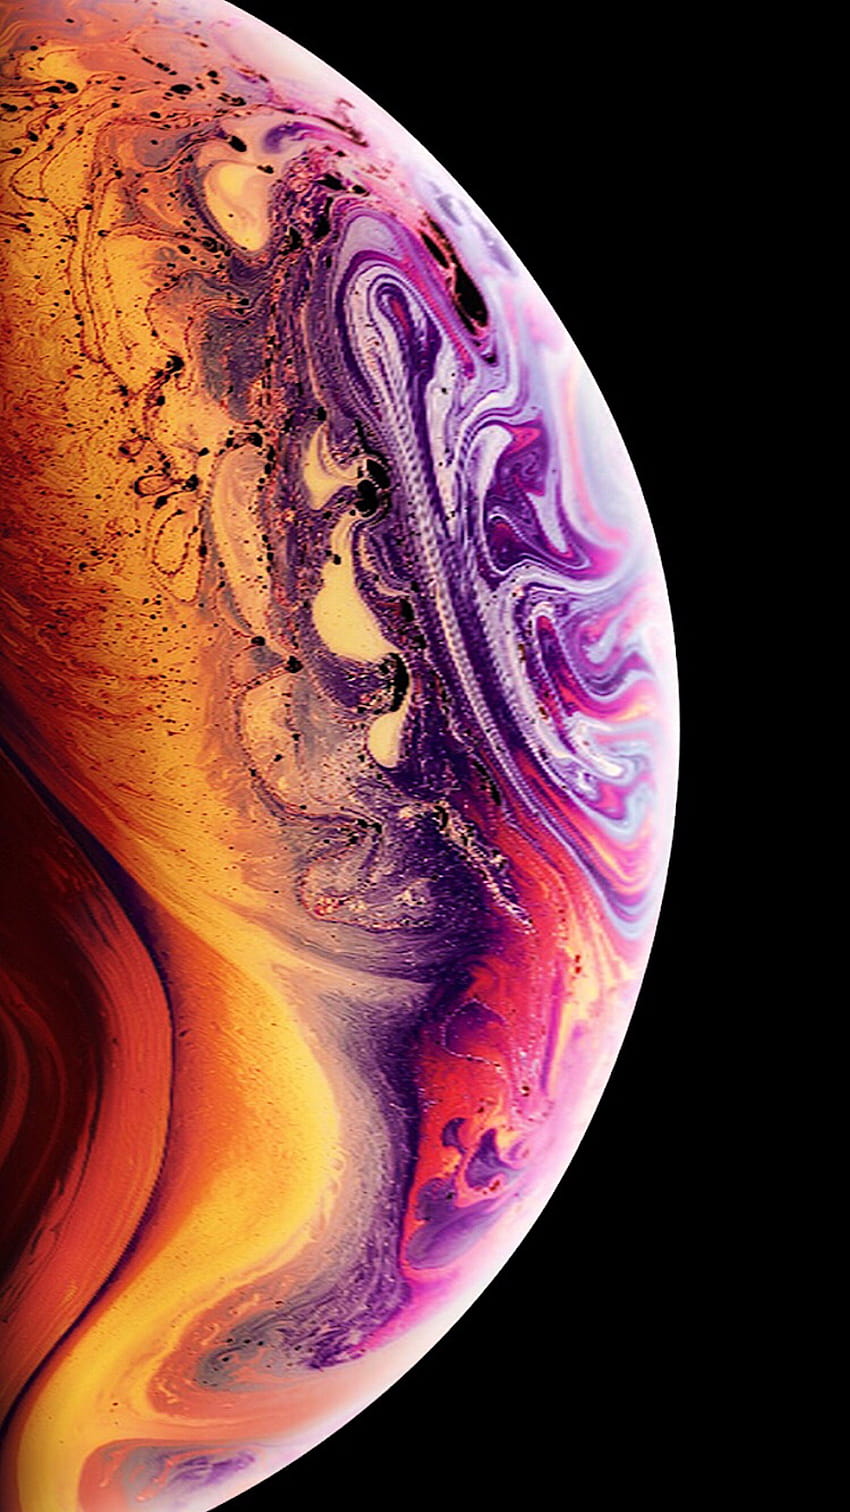 IPhone XS and XS Max in High Quality for, iphone xs HD phone wallpaper ...